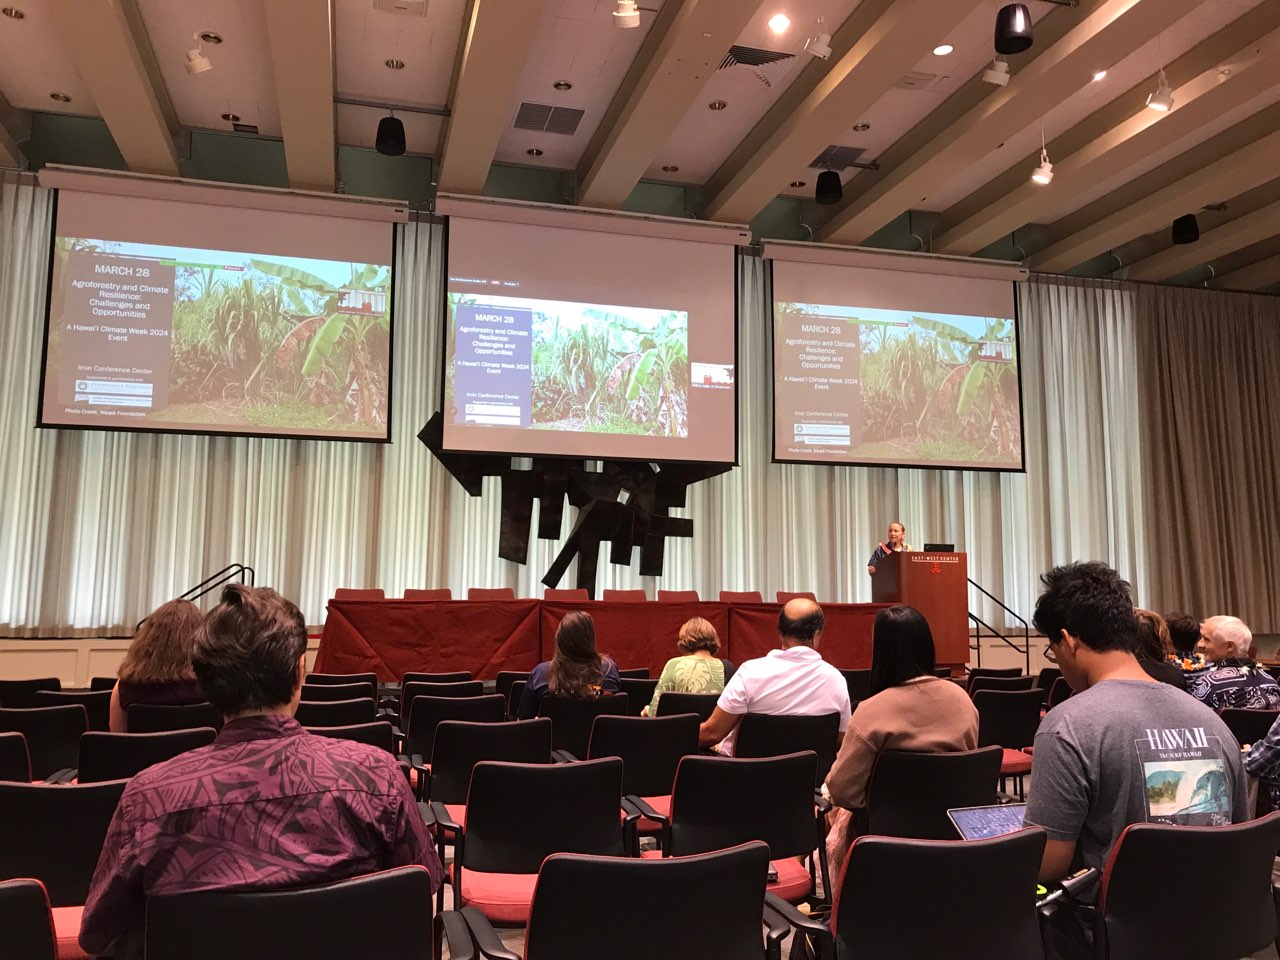 Ashley McGuigan opening the session on Agroforestry and Climate Resilience: Challenges and Opportunities at Hawai'i Climate Week